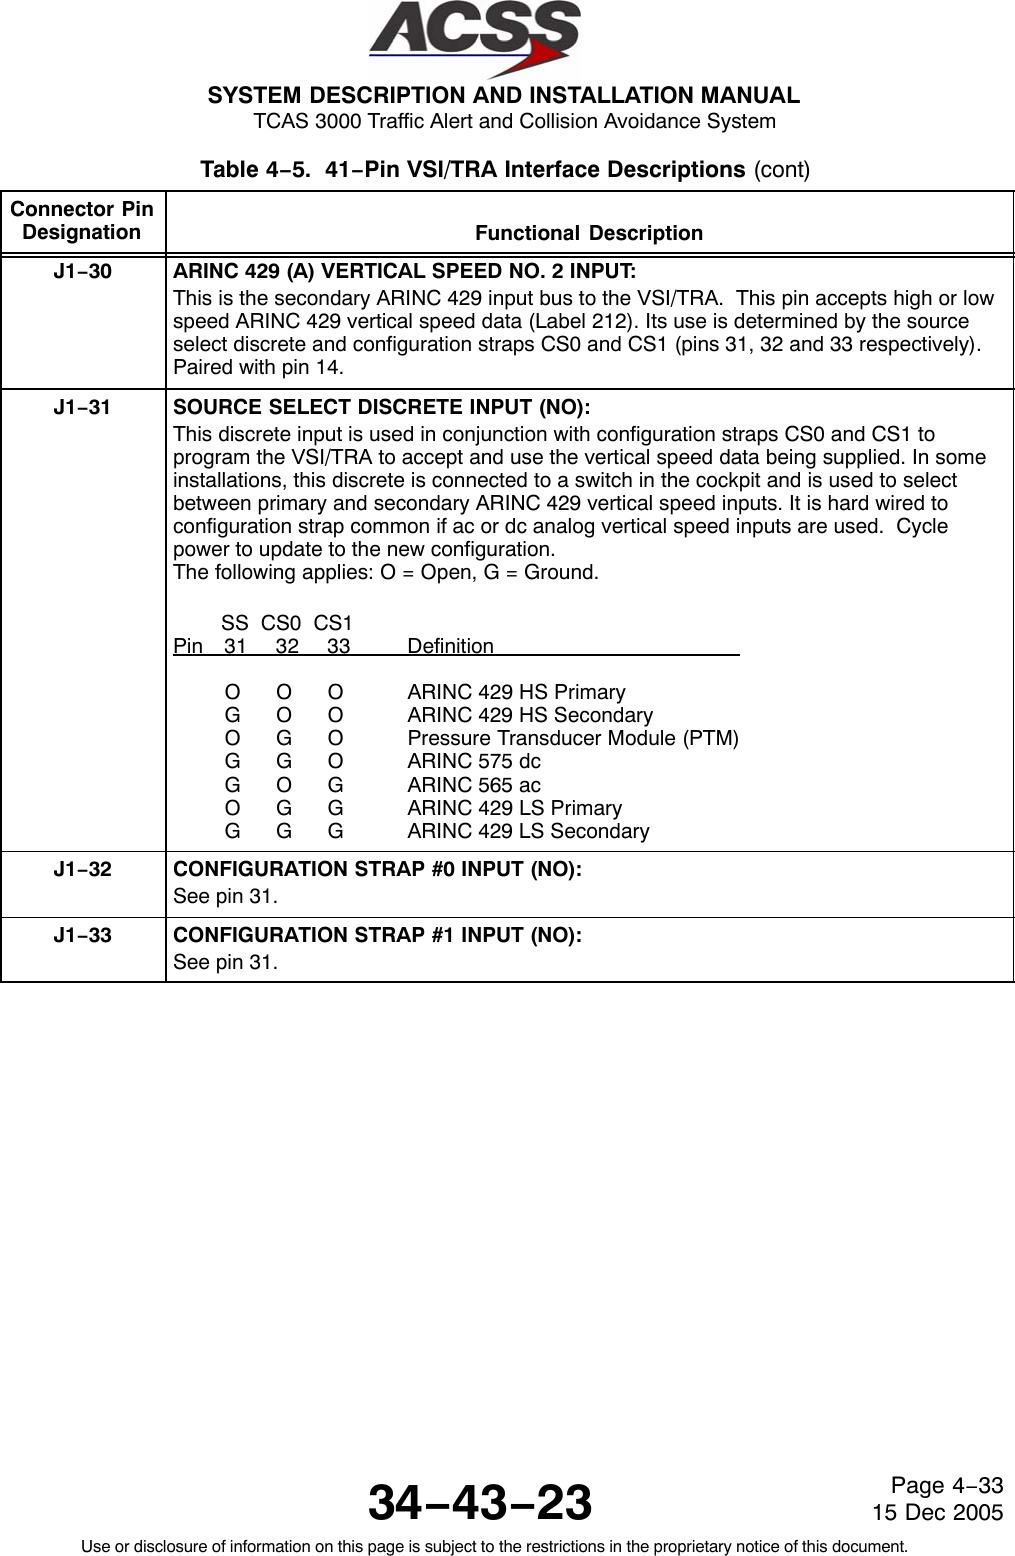 SYSTEM DESCRIPTION AND INSTALLATION MANUAL TCAS 3000 Traffic Alert and Collision Avoidance System34−43−23Use or disclosure of information on this page is subject to the restrictions in the proprietary notice of this document.Page 4−3315 Dec 2005Table 4−5.  41−Pin VSI/TRA Interface Descriptions (cont)Connector PinDesignation Functional DescriptionJ1−30 ARINC 429 (A) VERTICAL SPEED NO. 2 INPUT:This is the secondary ARINC 429 input bus to the VSI/TRA.  This pin accepts high or lowspeed ARINC 429 vertical speed data (Label 212). Its use is determined by the sourceselect discrete and configuration straps CS0 and CS1 (pins 31, 32 and 33 respectively).Paired with pin 14.J1−31 SOURCE SELECT DISCRETE INPUT (NO):This discrete input is used in conjunction with configuration straps CS0 and CS1 toprogram the VSI/TRA to accept and use the vertical speed data being supplied. In someinstallations, this discrete is connected to a switch in the cockpit and is used to selectbetween primary and secondary ARINC 429 vertical speed inputs. It is hard wired toconfiguration strap common if ac or dc analog vertical speed inputs are used.  Cyclepower to update to the new configuration.The following applies: O = Open, G = Ground.        SS  CS0  CS1Pin 31 32 33 DefinitionO O O ARINC 429 HS PrimaryG O O ARINC 429 HS SecondaryO G O Pressure Transducer Module (PTM)G G O ARINC 575 dcG O G ARINC 565 acO G G ARINC 429 LS PrimaryG G G ARINC 429 LS SecondaryJ1−32 CONFIGURATION STRAP #0 INPUT (NO):See pin 31.J1−33 CONFIGURATION STRAP #1 INPUT (NO):See pin 31.